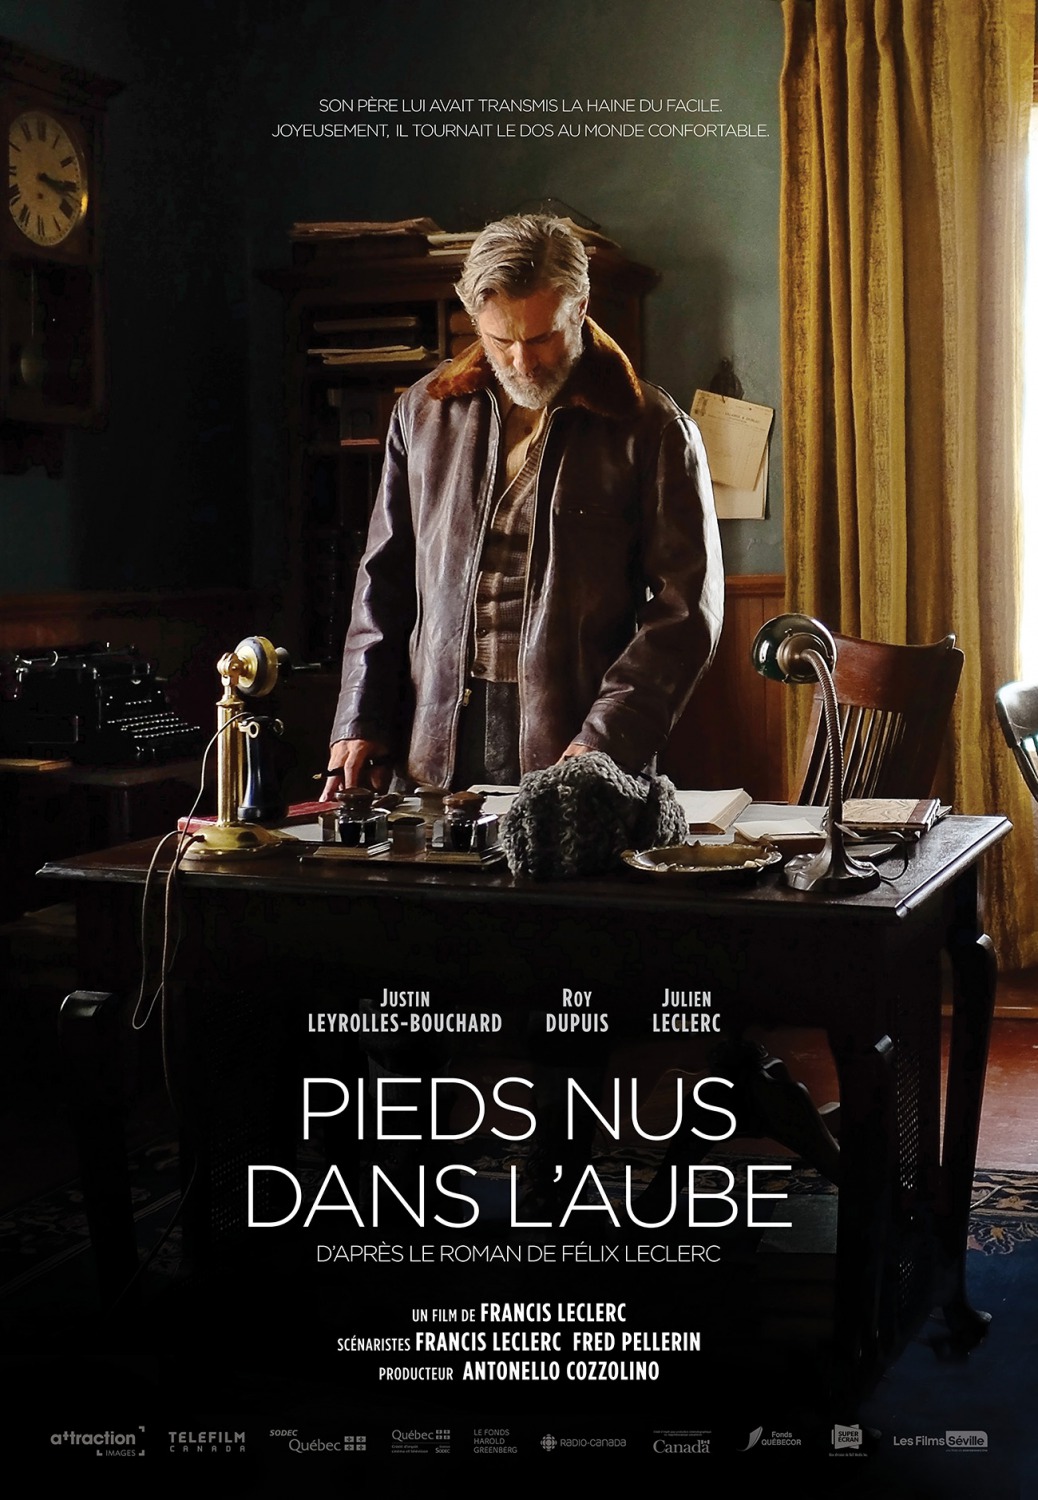 Extra Large Movie Poster Image for Pieds nus dans l'aube (#2 of 4)